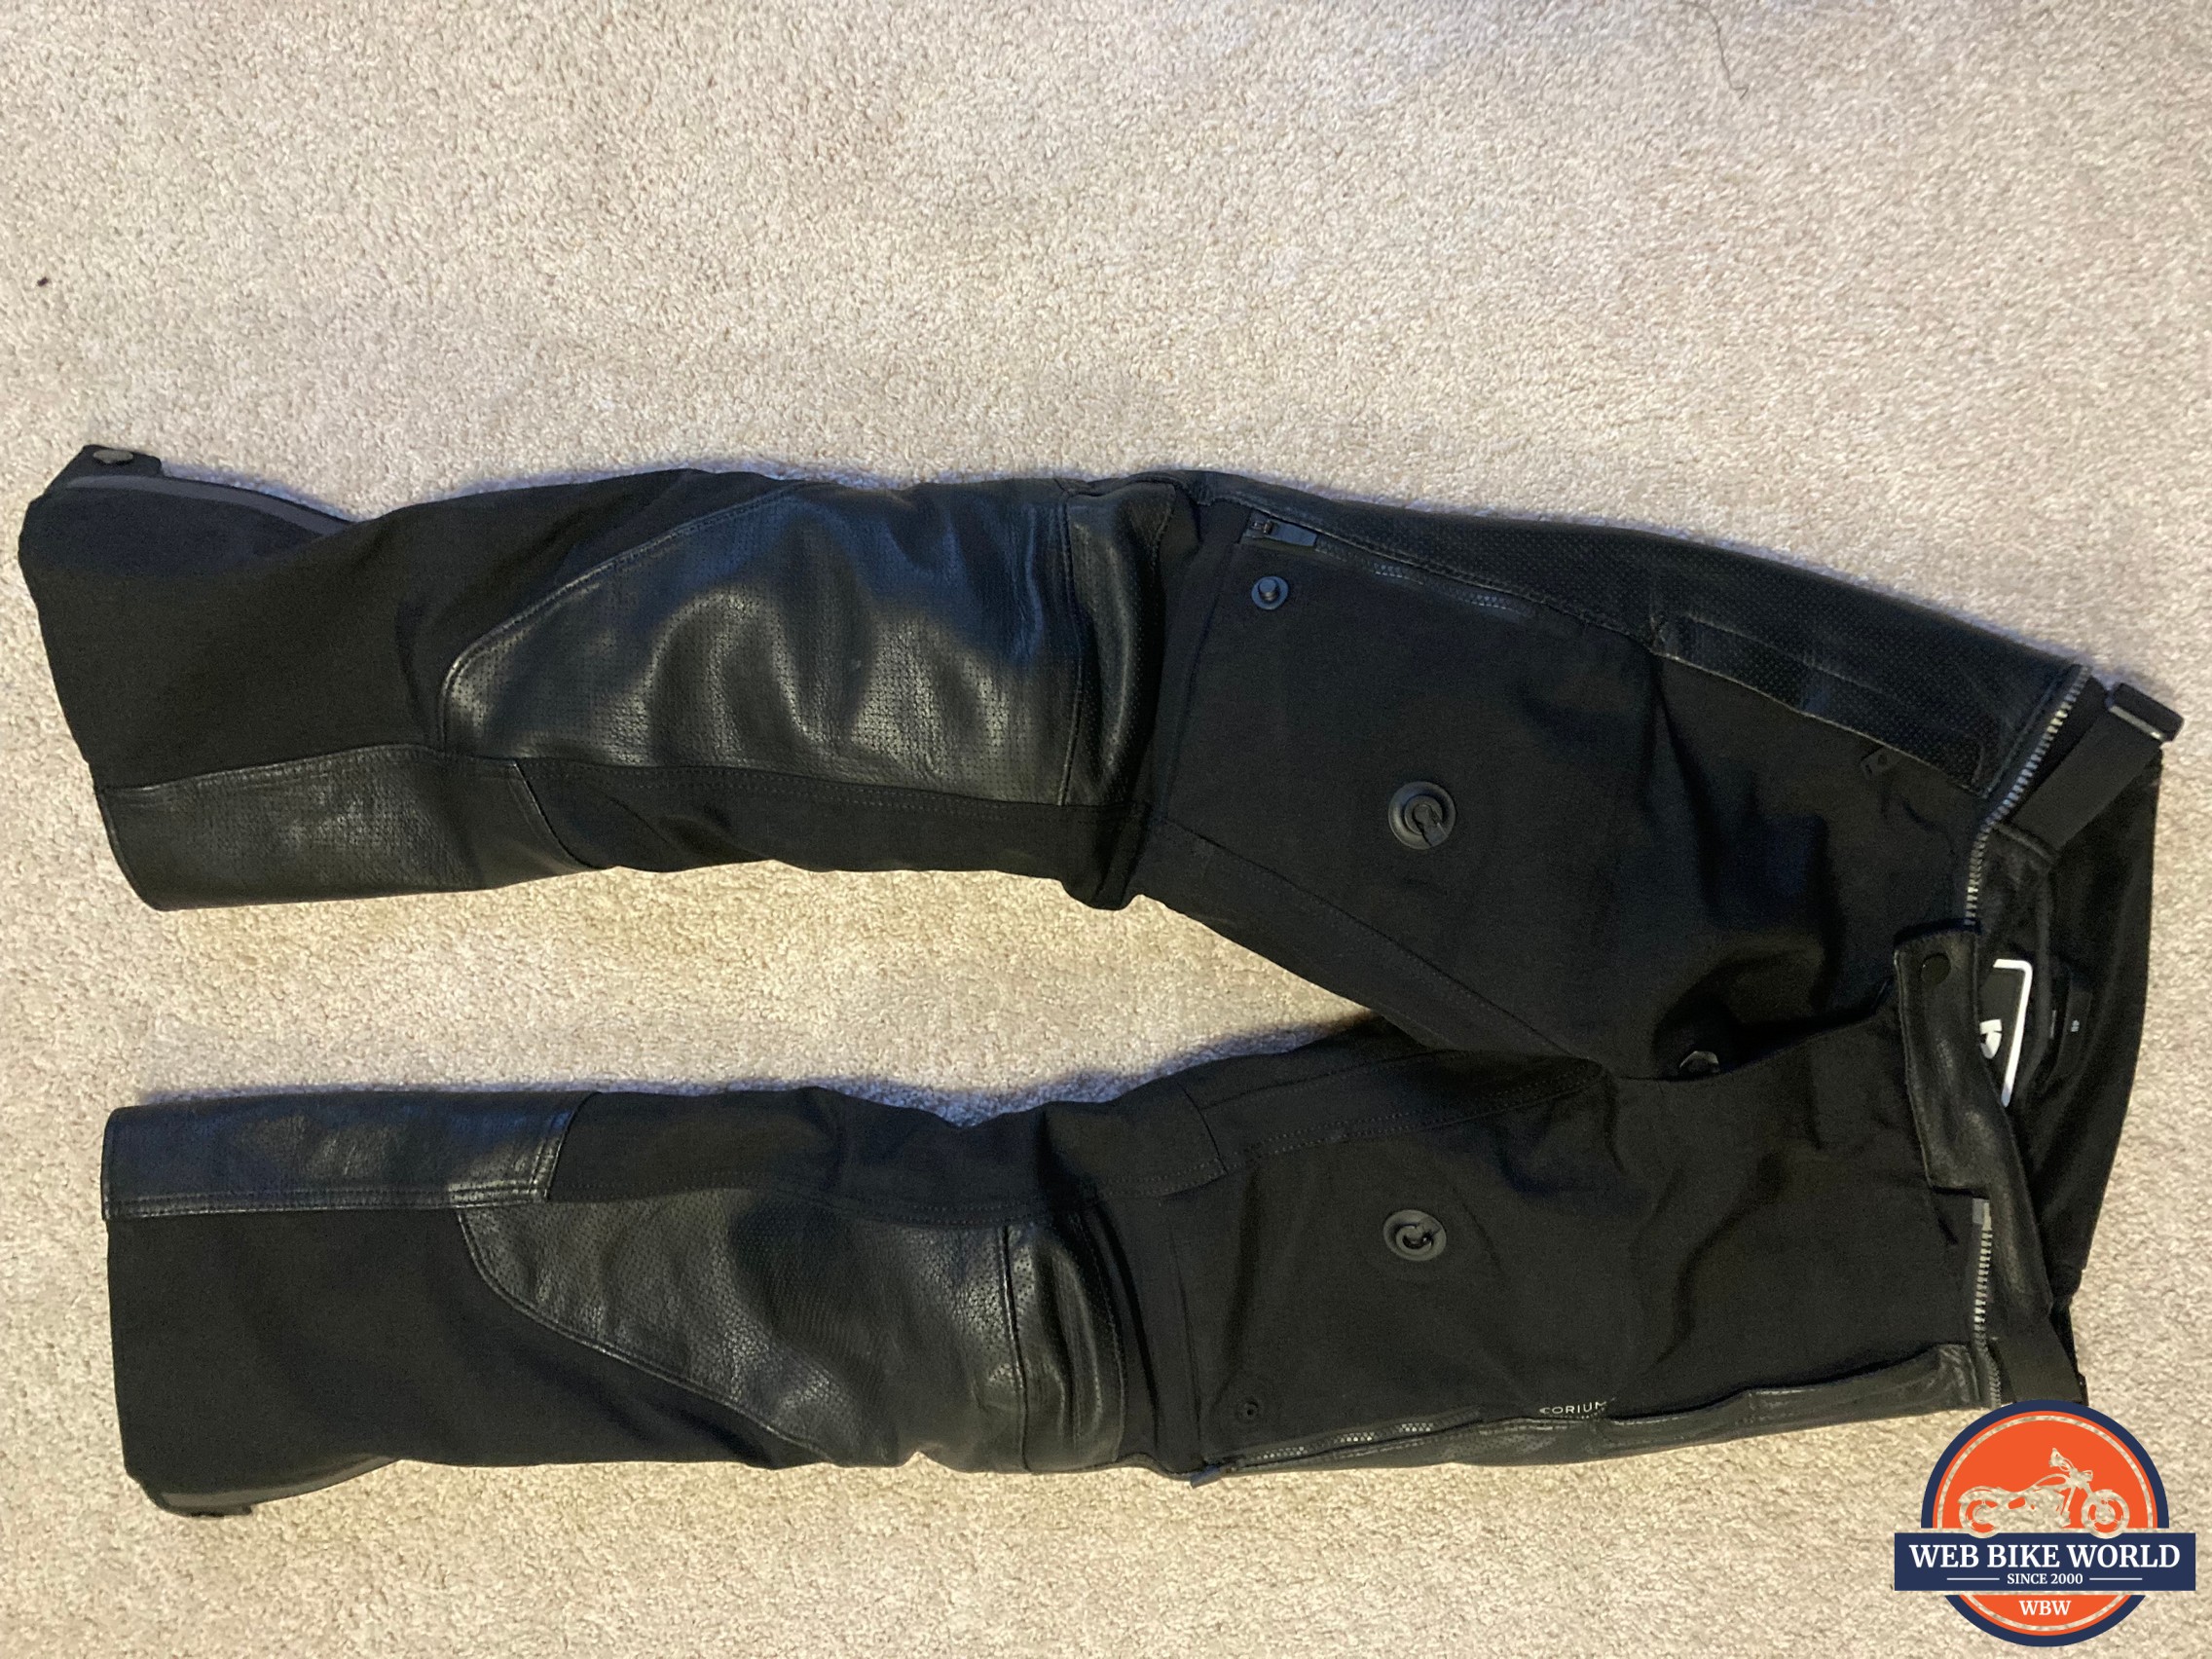 Leather coverage in various areas on the REV’IT! Valve H2O Pant